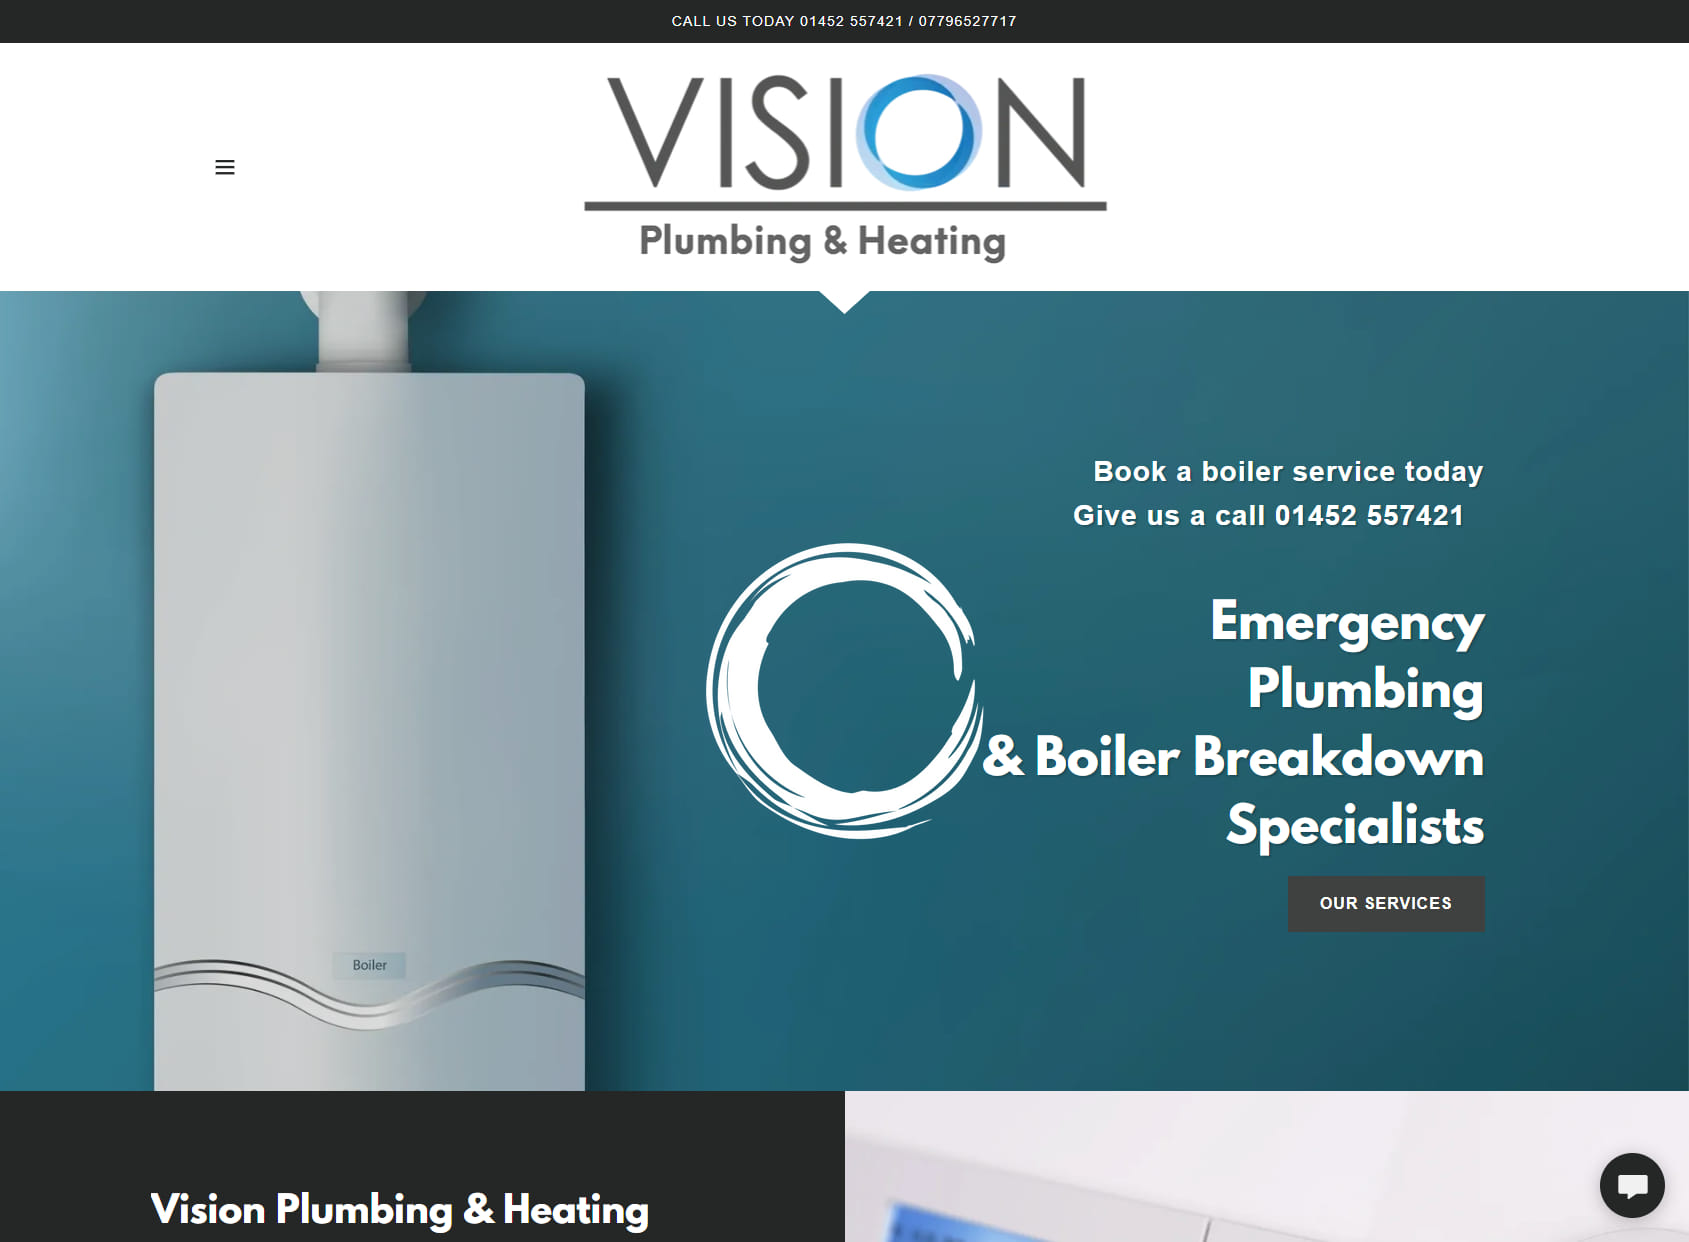 Vision Plumbing and Heating